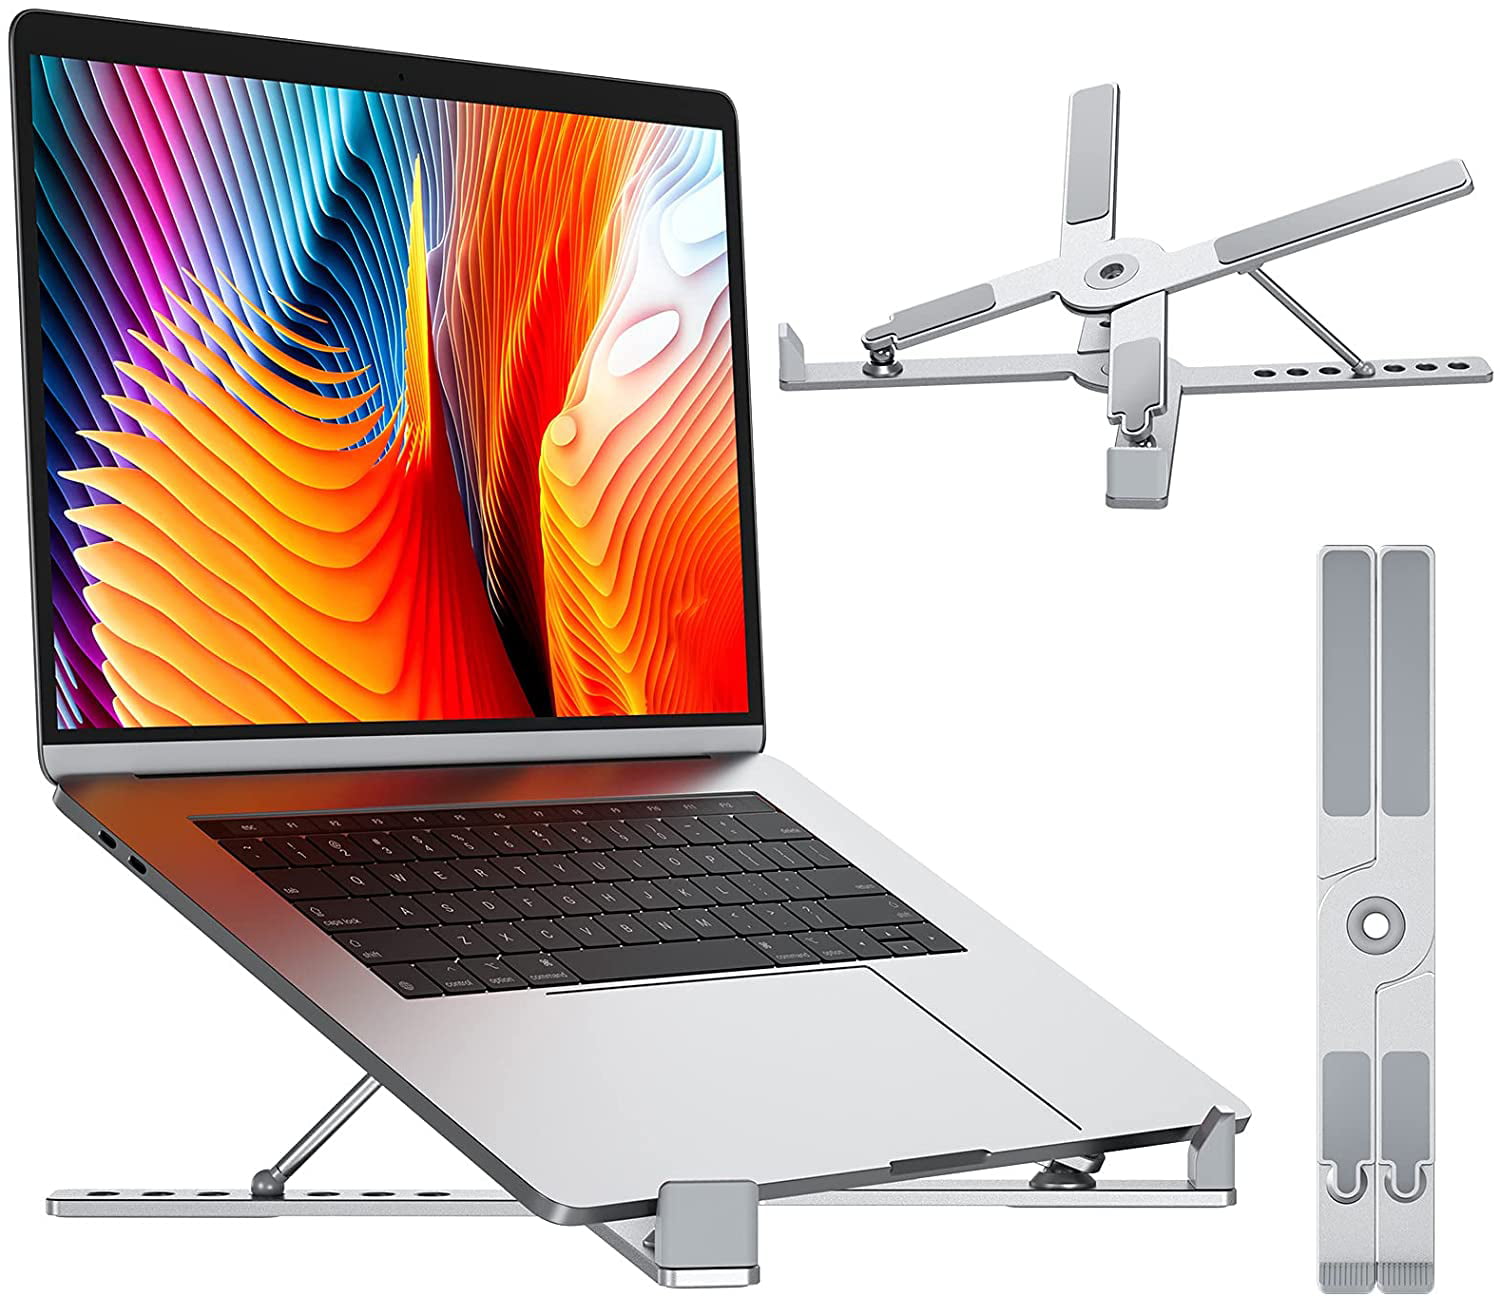 I want to fly freely Laptop Stand Multi-Angle Laptop Riser Hot Air Adjustable Laptop Stand Compatible with 11-17 Inch Laptops Color:A 